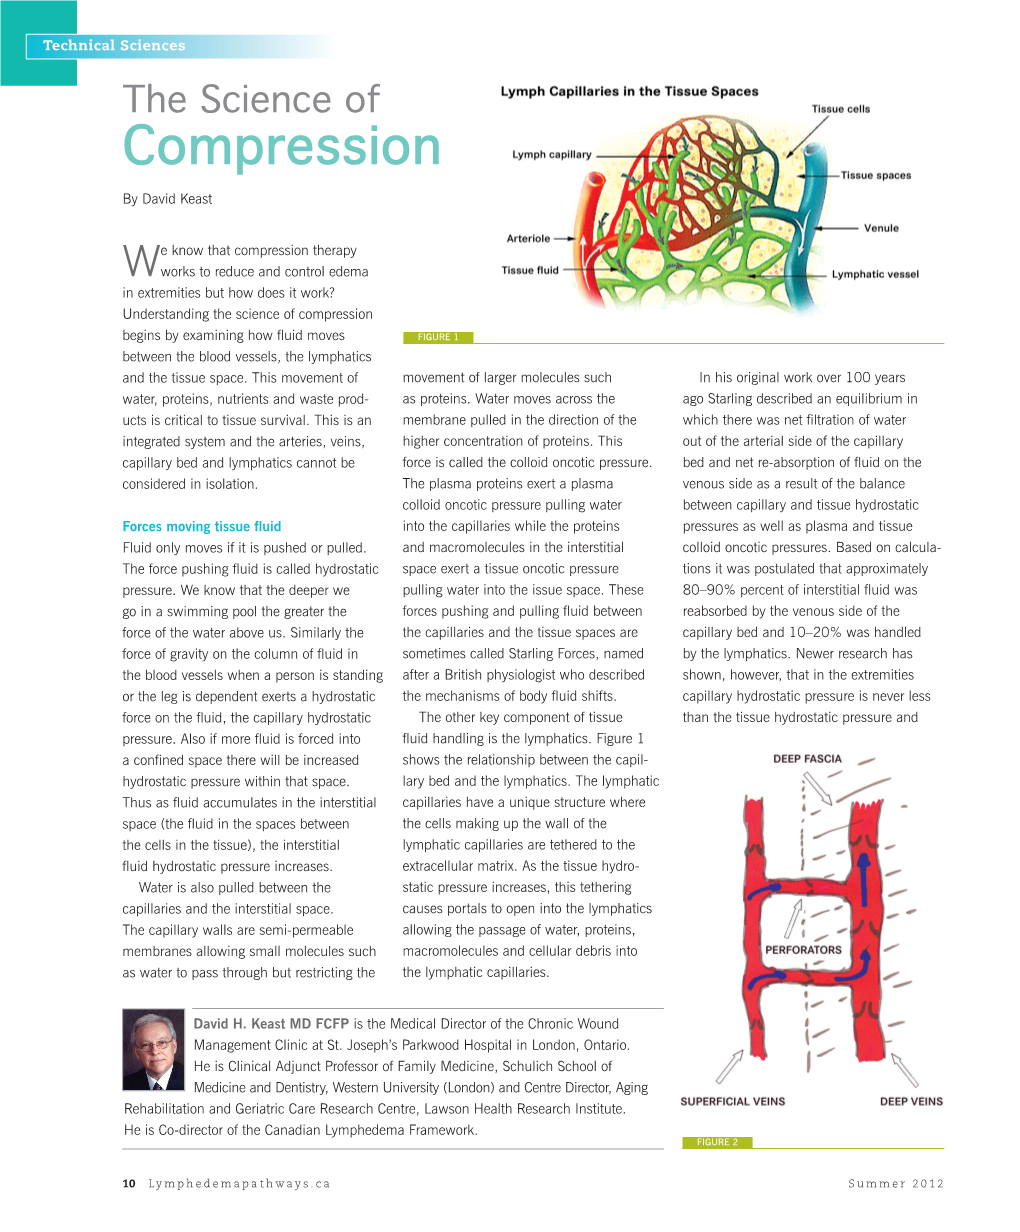 The Science of Compression